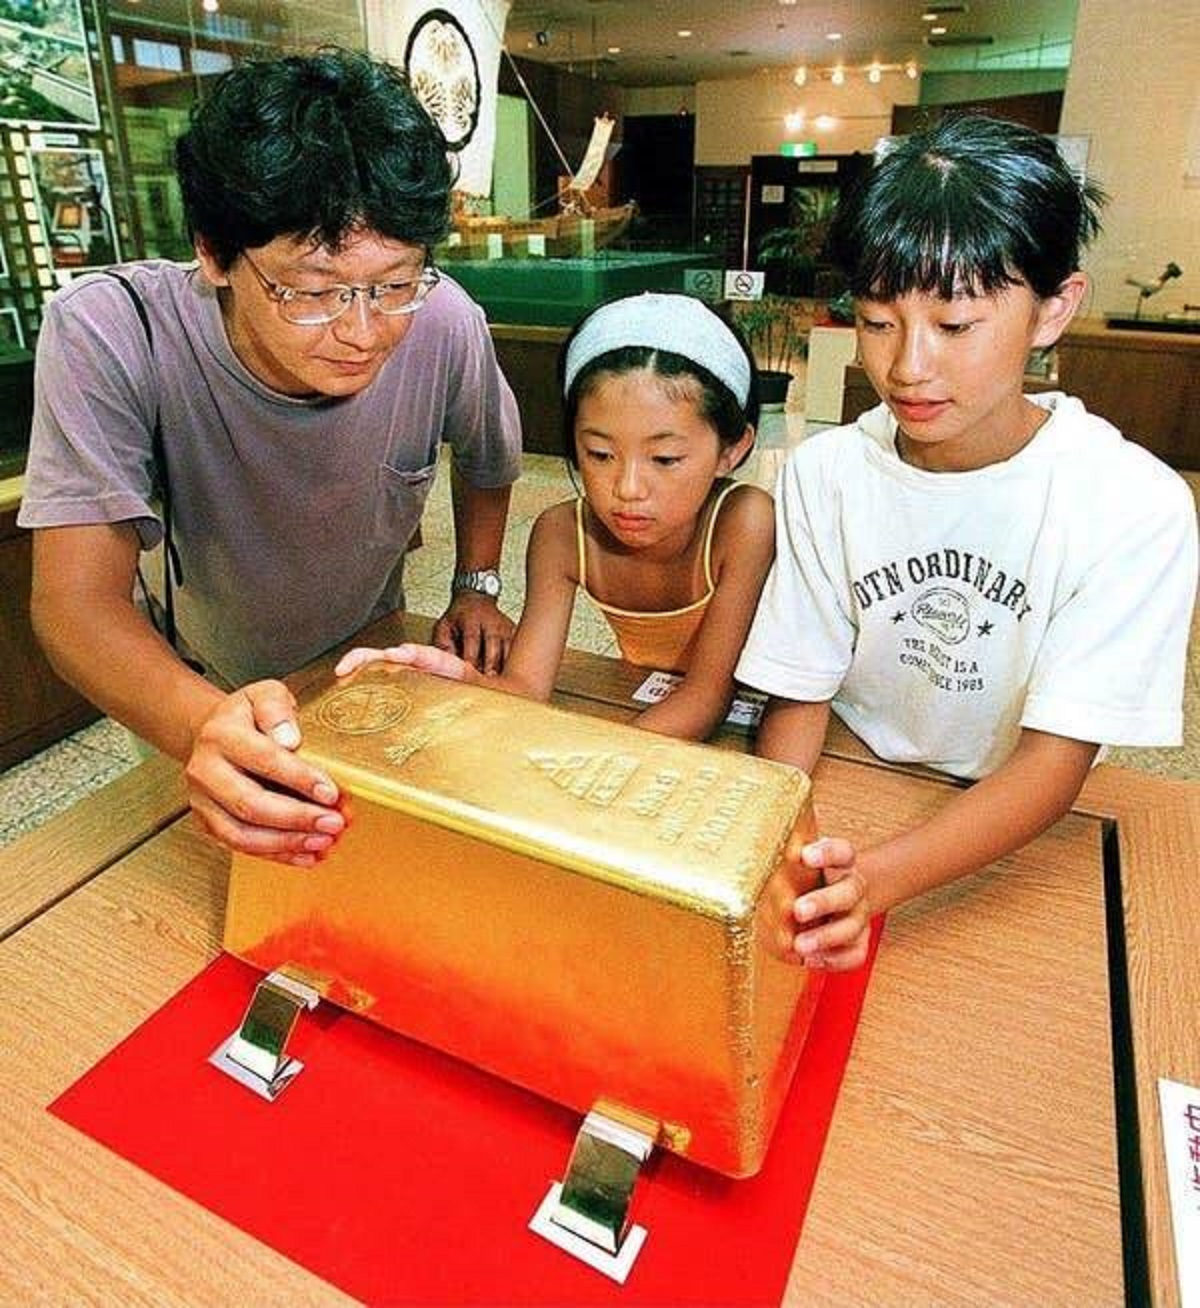 This 440-pound gold bar, located in Japan, is the largest gold ingot in the world: